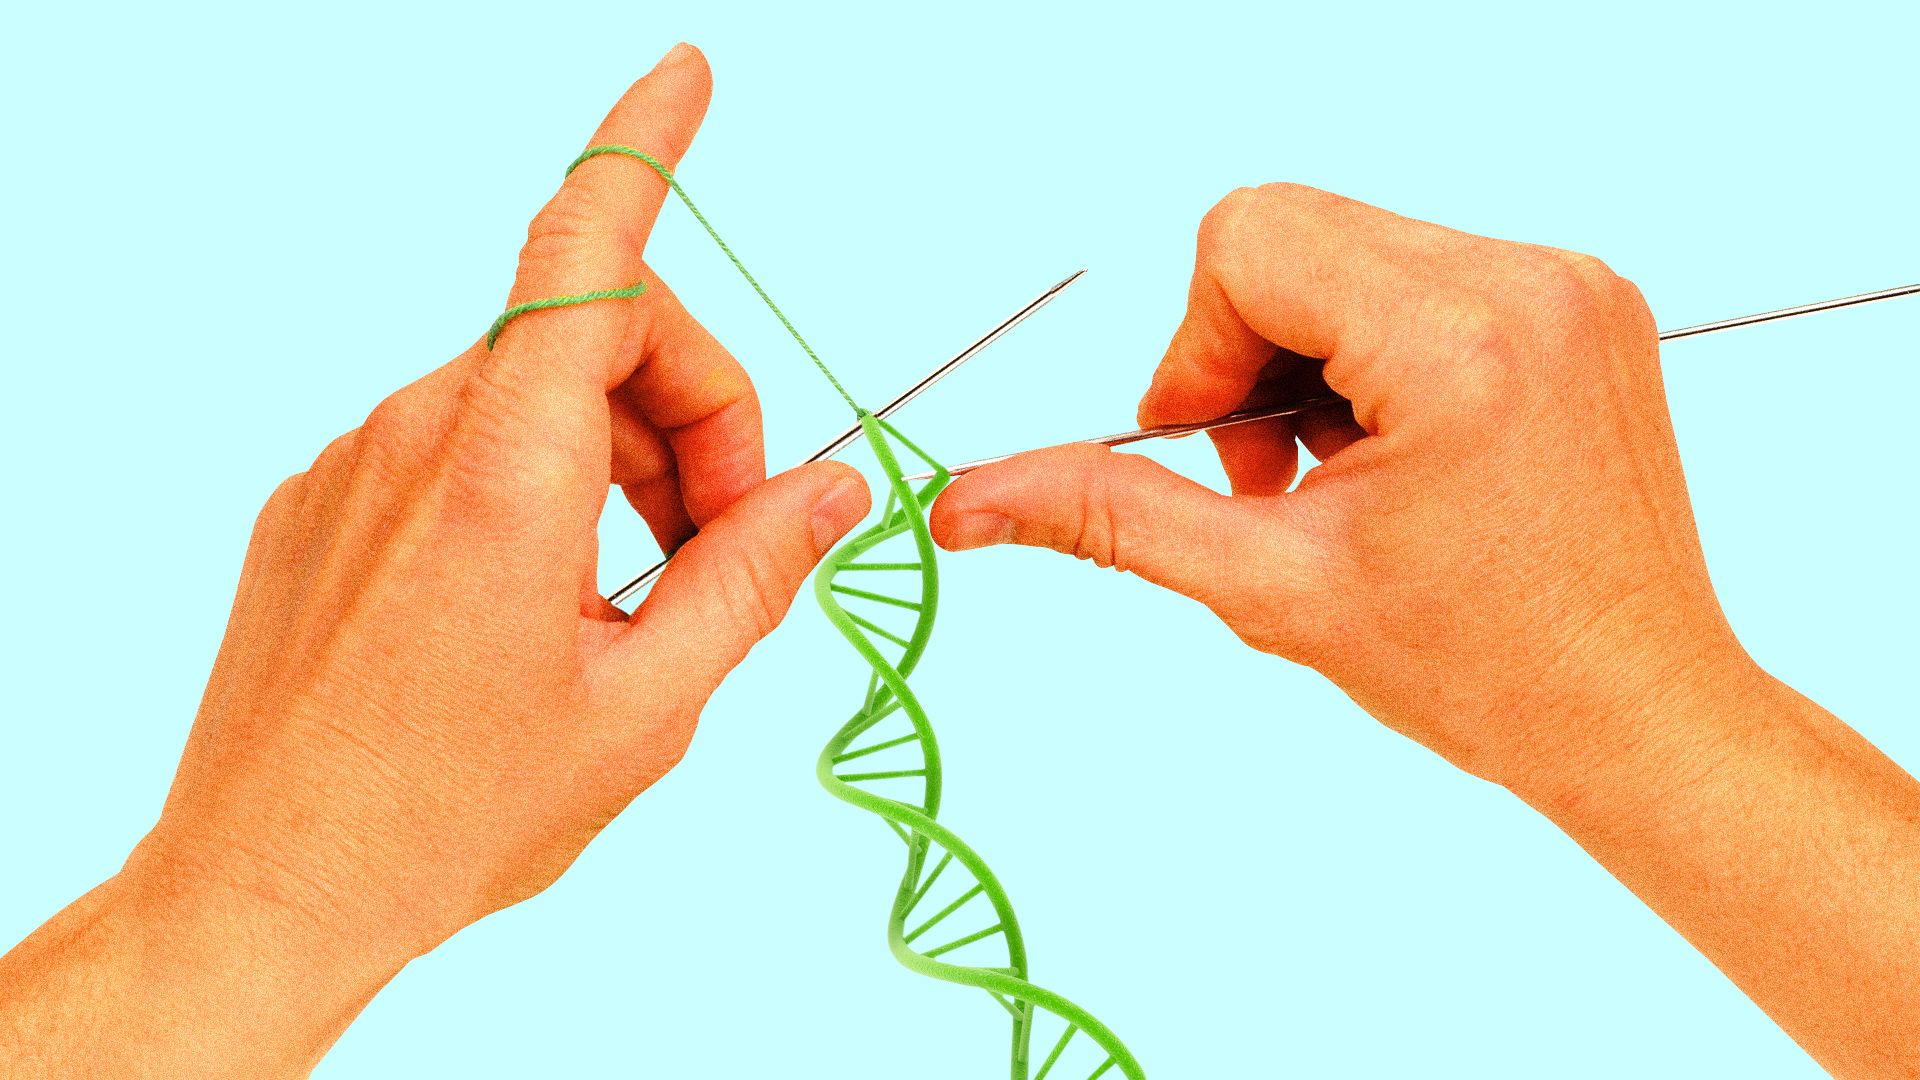 Illustration of two hands knitting a DNA helix.